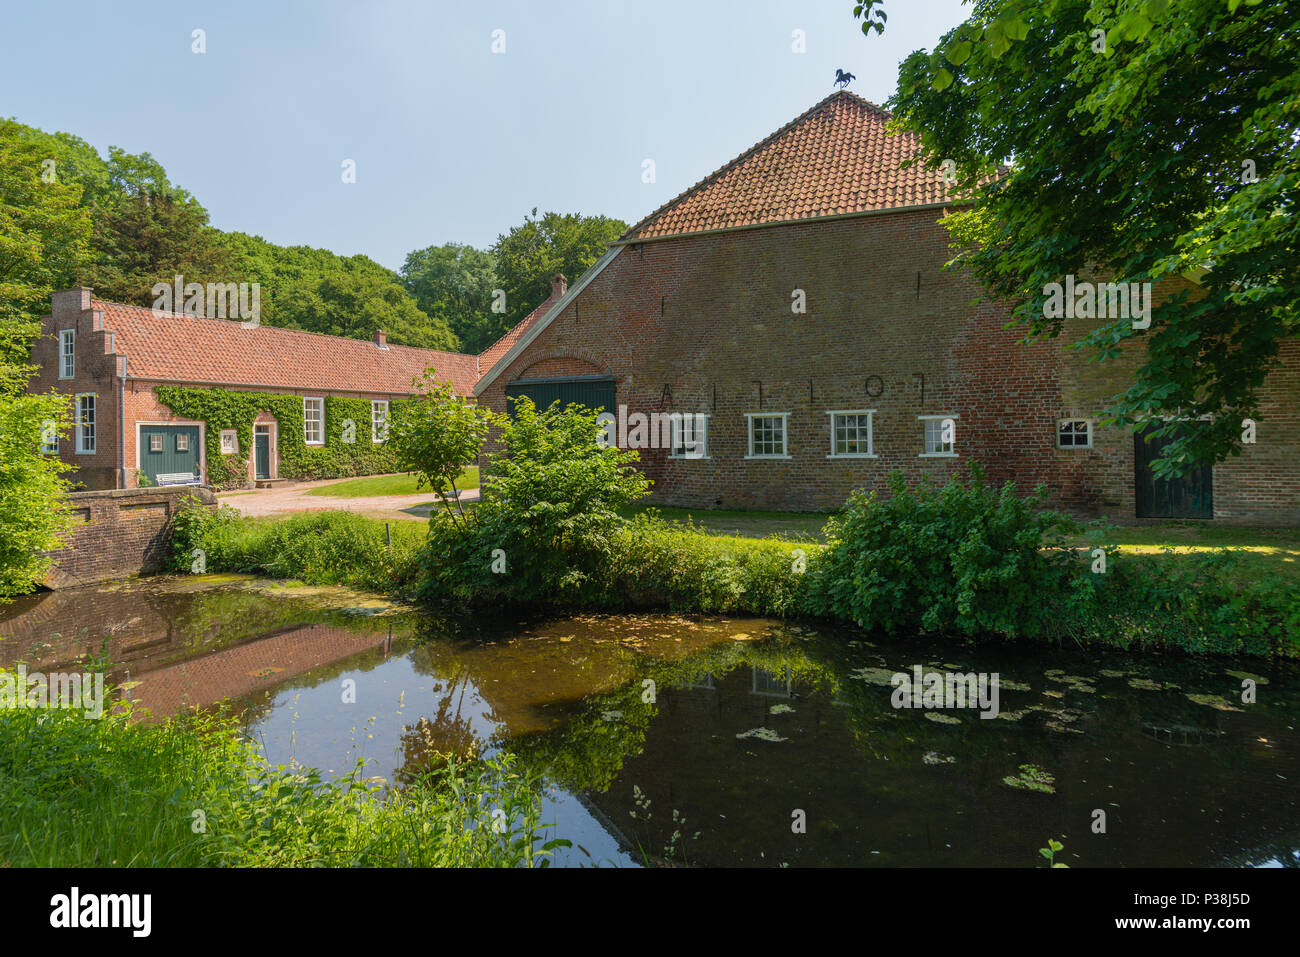 Moated castle  Castle Hinta, former seat of an East Frisian chieftain,  Hinte, East Frisia, Lower Saxony, Germany Stock Photo